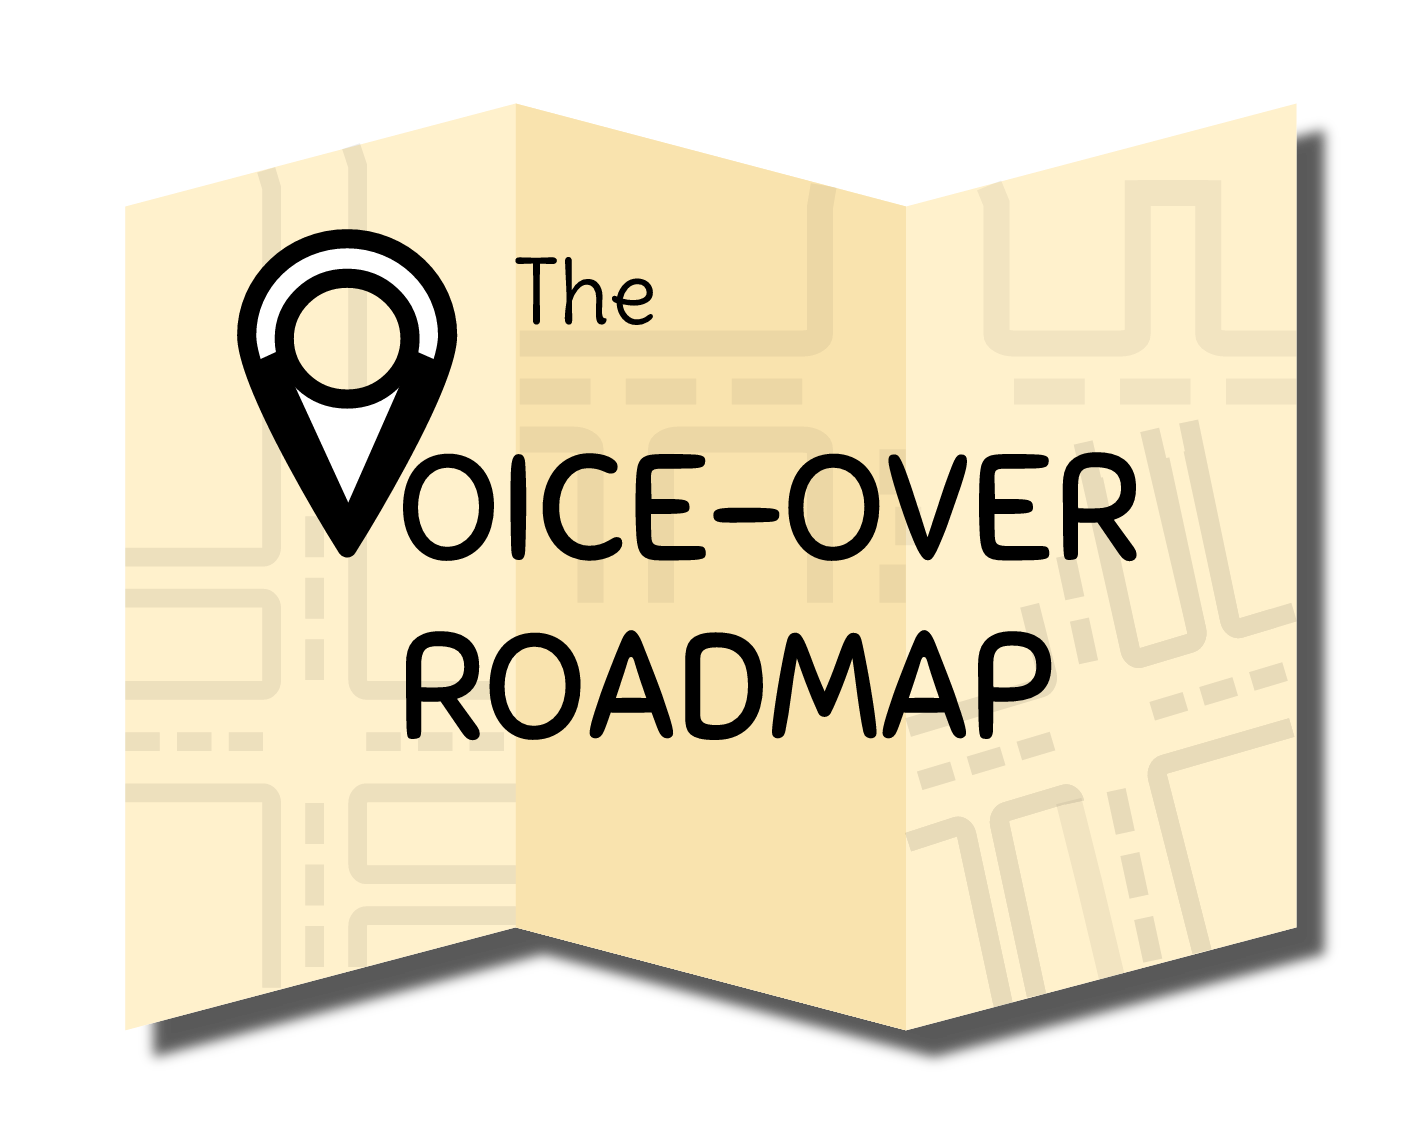 The Voice-Over Roadmap